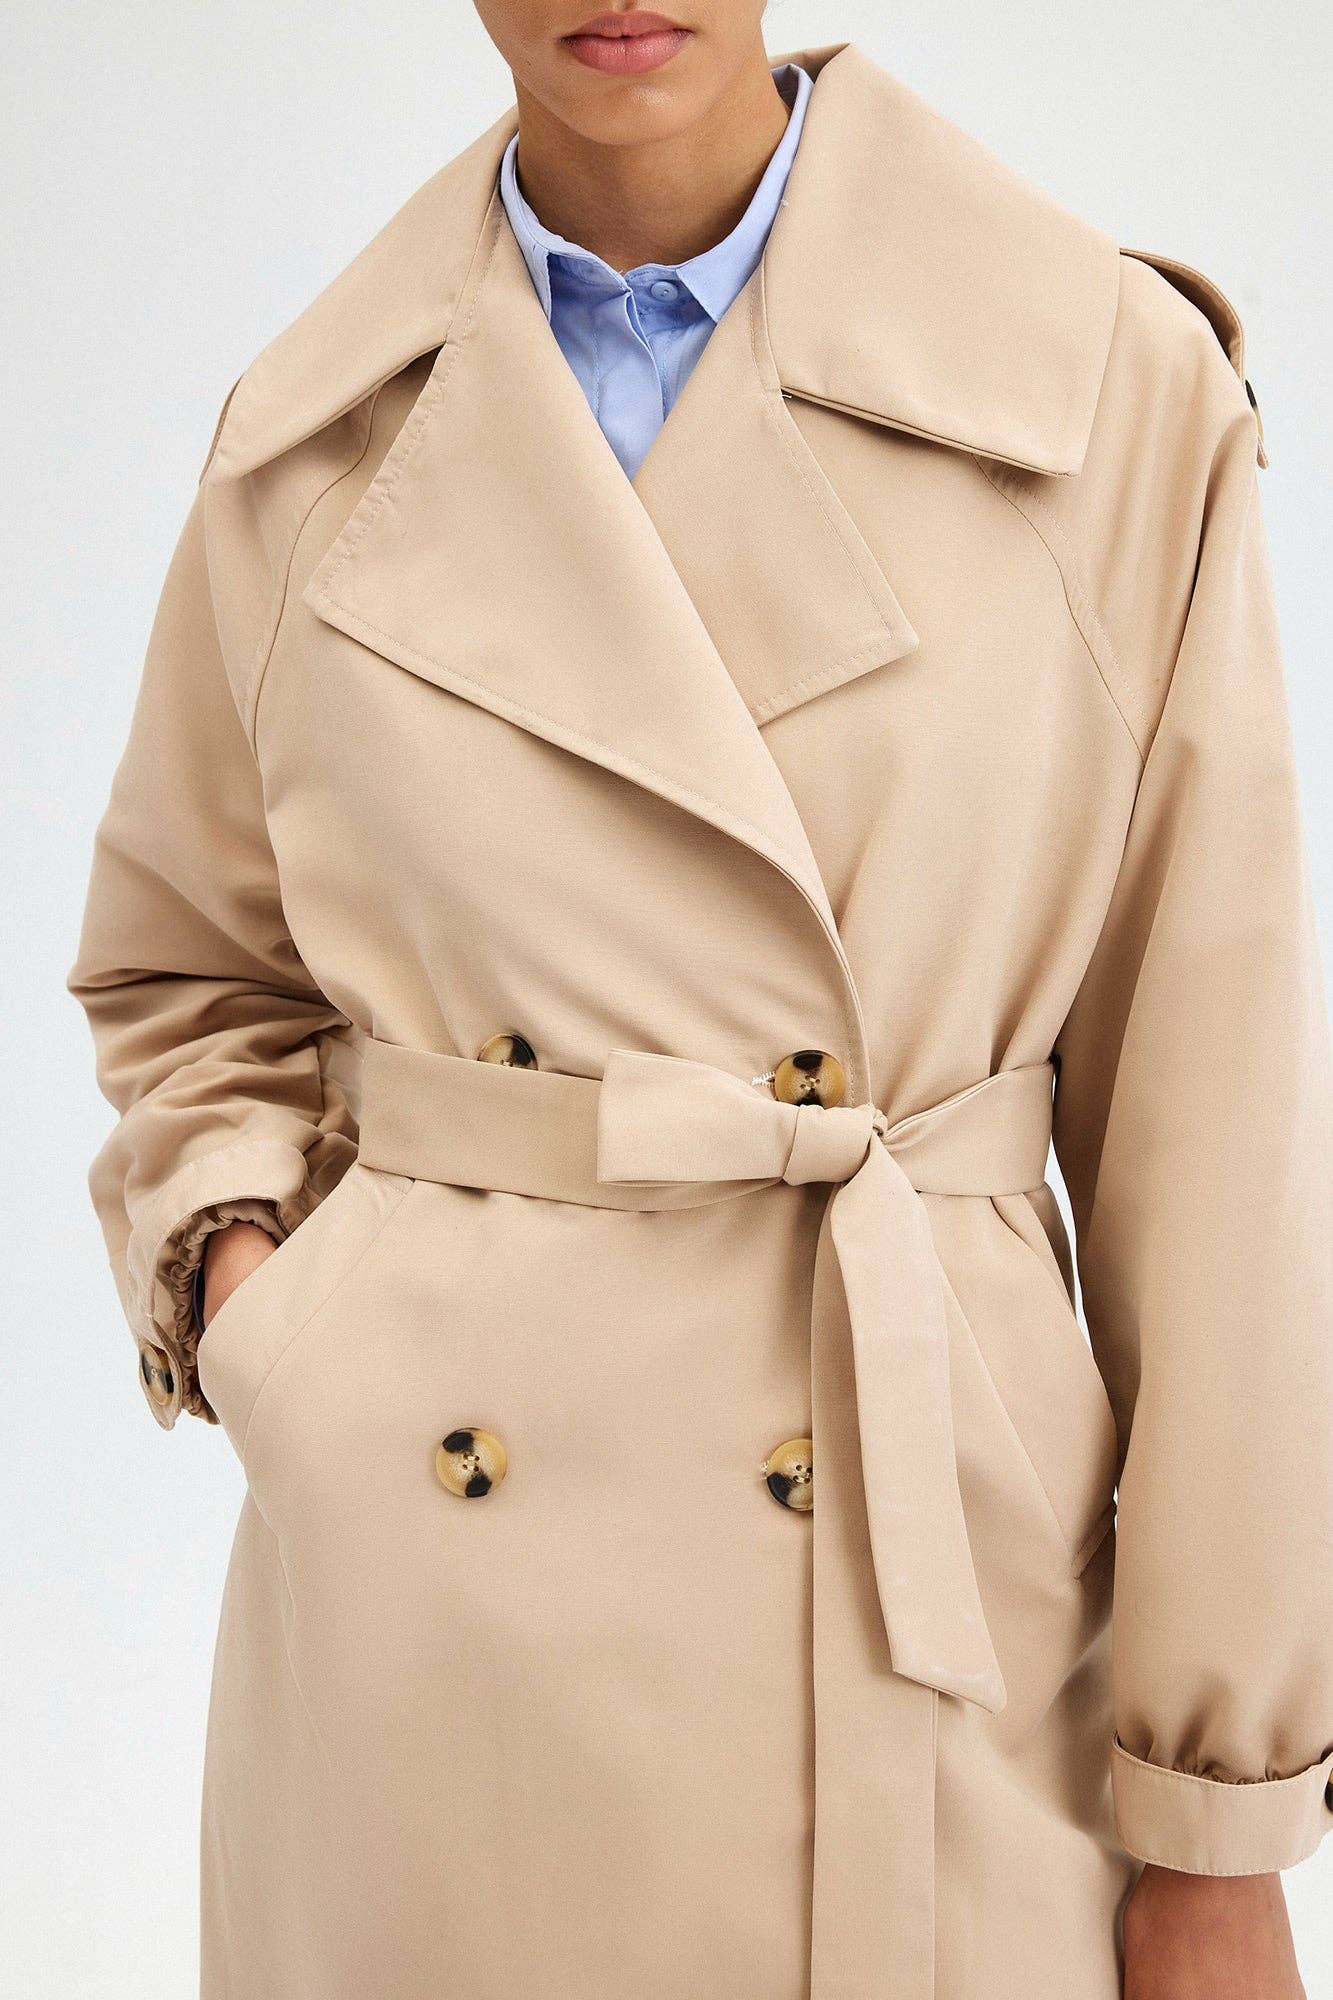 DOUBLE BREASTED TRENCH COAT: Stone / Standart 23F1X054 - Touché Prive